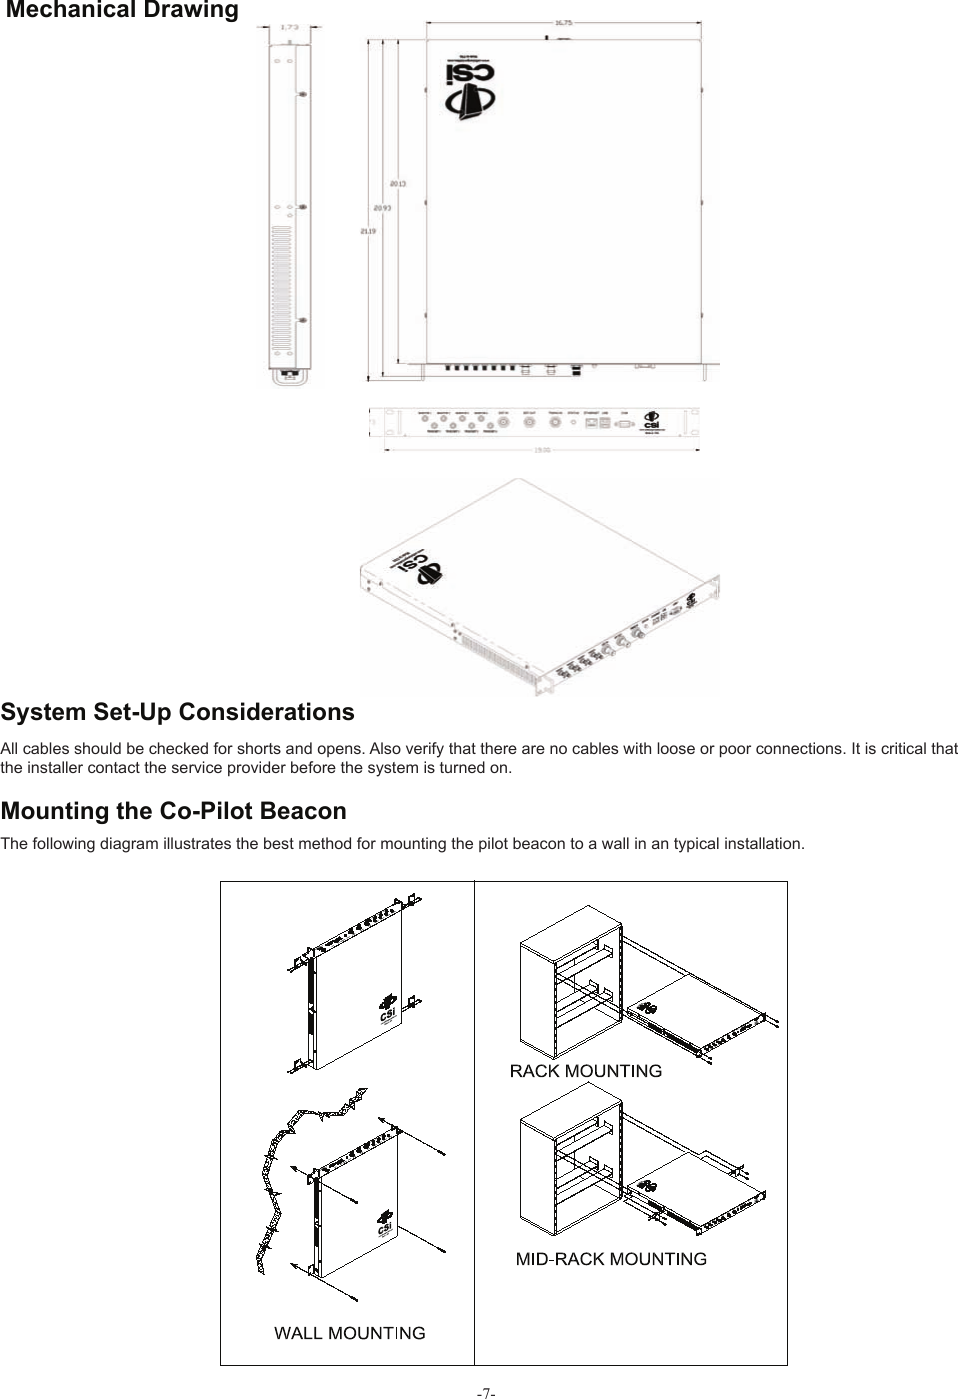 -7-  Mechanical Drawing All cables should be checked for shorts and opens. Also verify that there are no cables with loose or poor connections. It is critical that the installer contact the service provider before the system is turned on.The following diagram illustrates the best method for mounting the pilot beacon to a wall in an typical installation.  System Set-Up ConsiderationsMounting the Co-Pilot Beacon